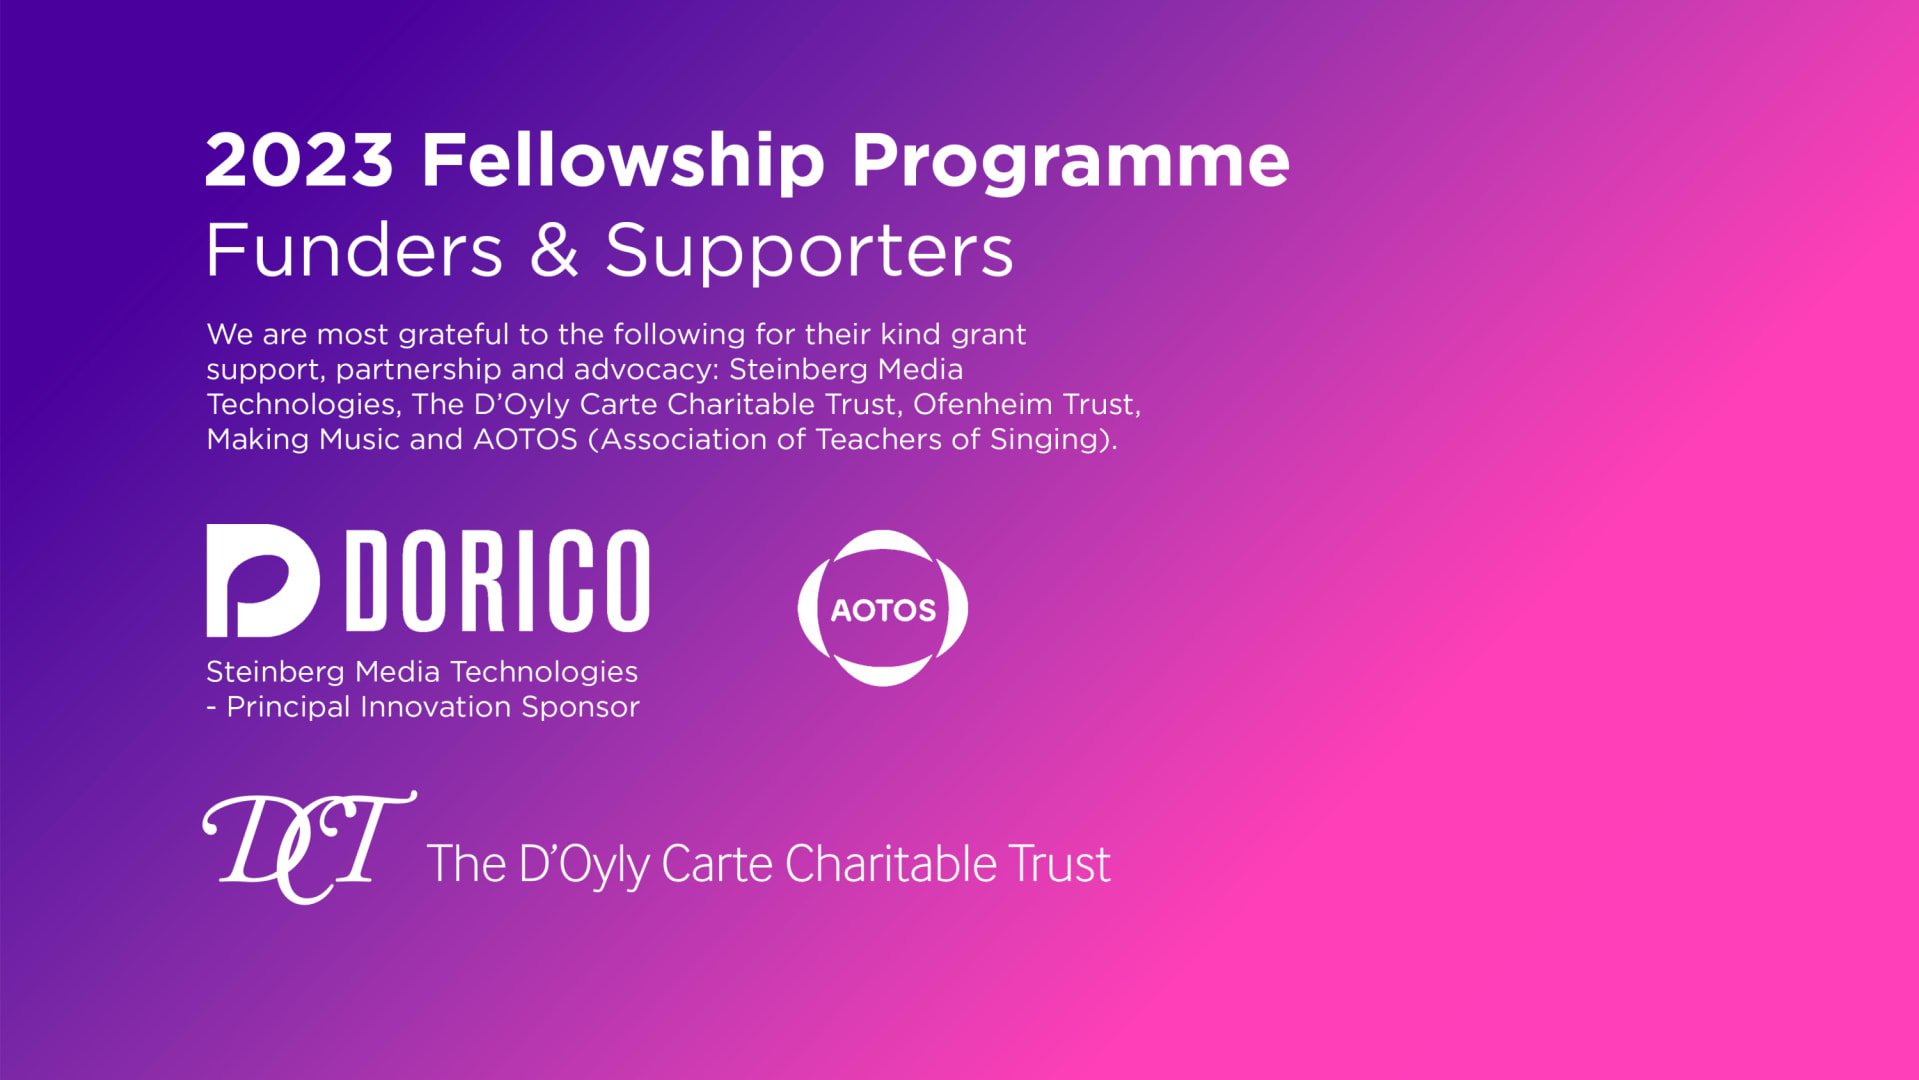 Sponsor credit with logos: We are most grateful to the following for their kind grant support, partnership and advocacy: Steinberg Media Technologies, The DOyly Carte Charitable Trust, Ofenheim Trust, Making Music and AOTOS (Association of Teachers o